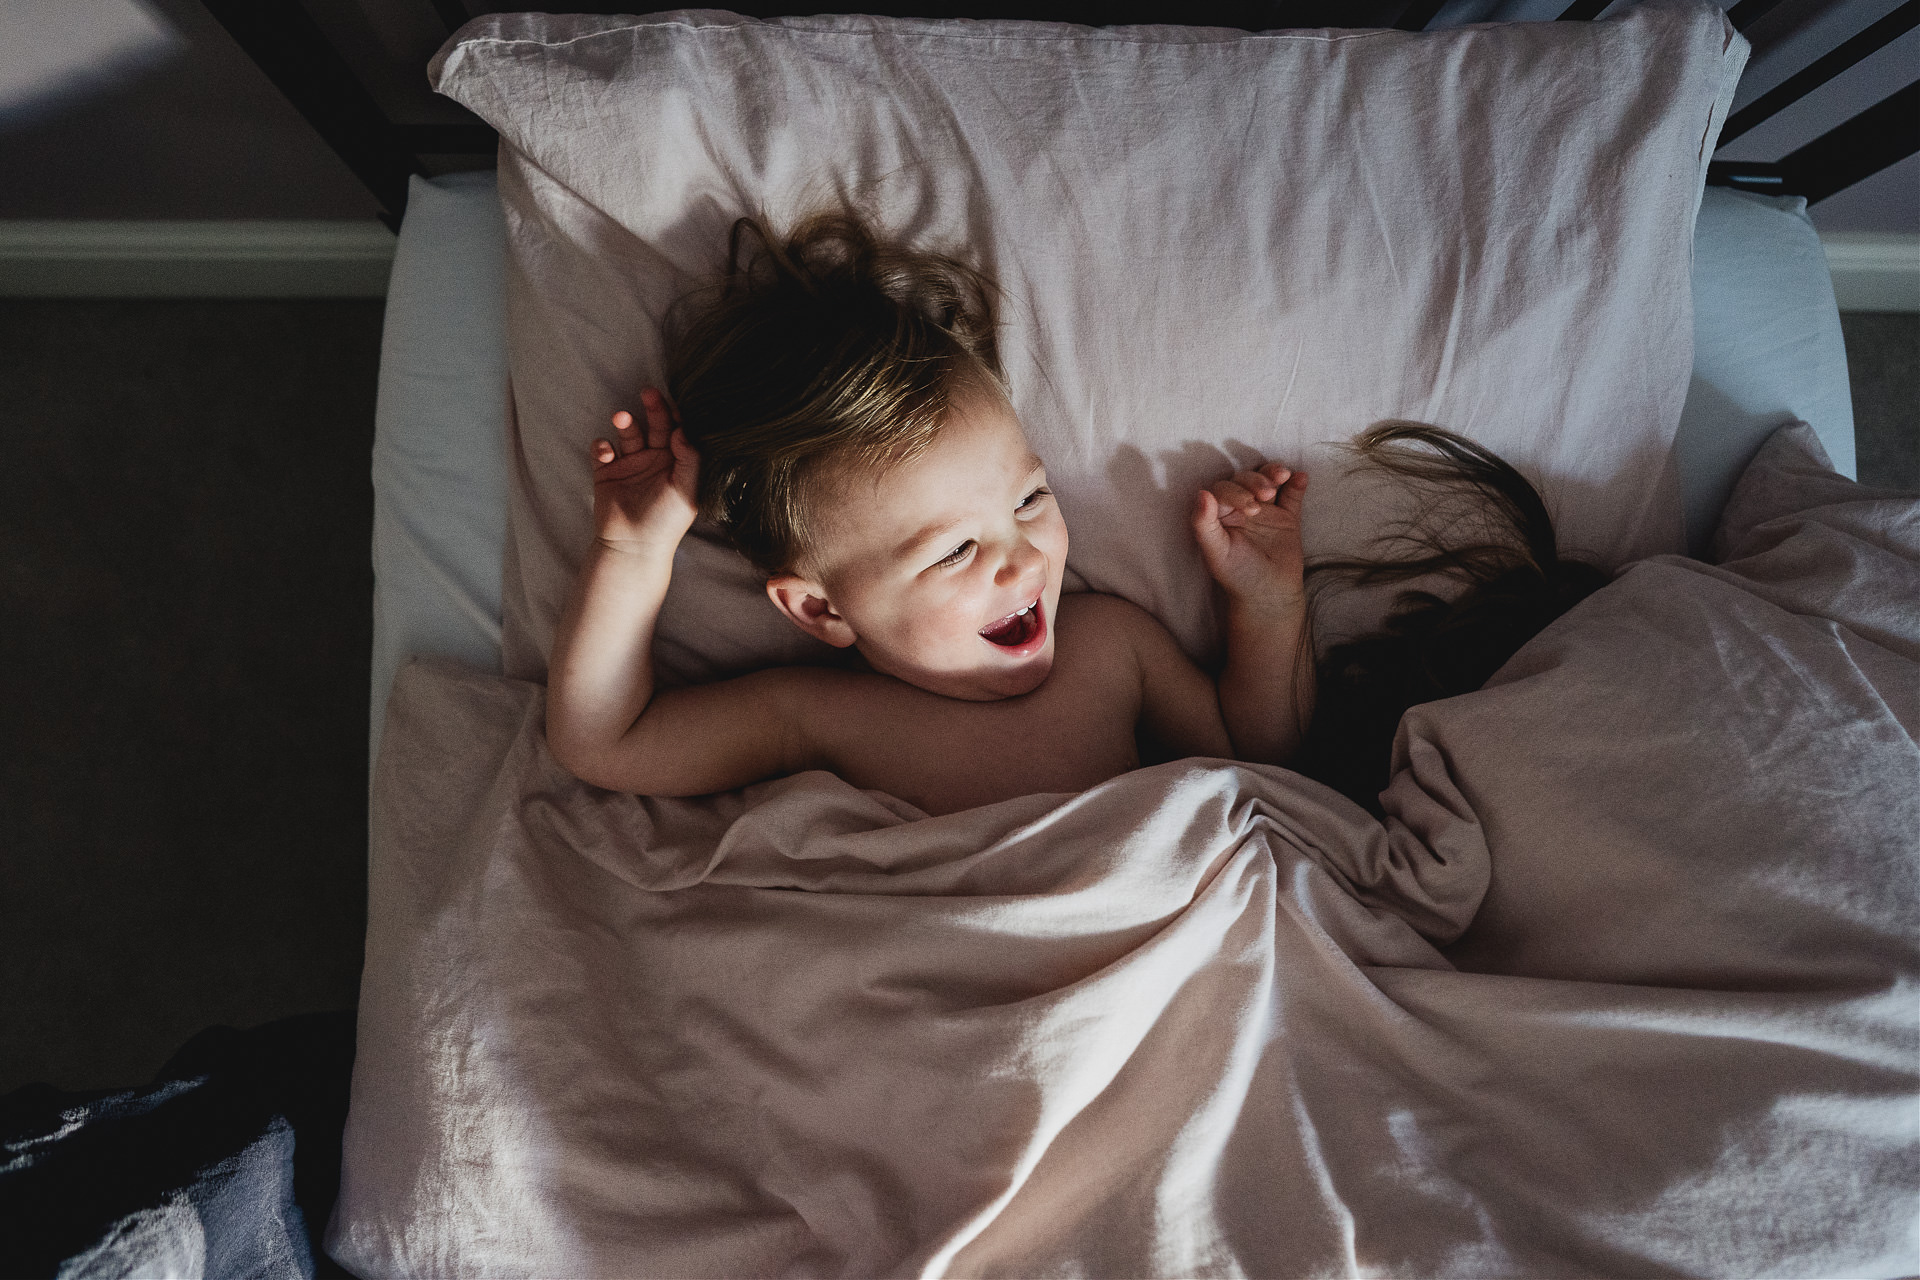 A young girl laughing in a bed with pink bedding